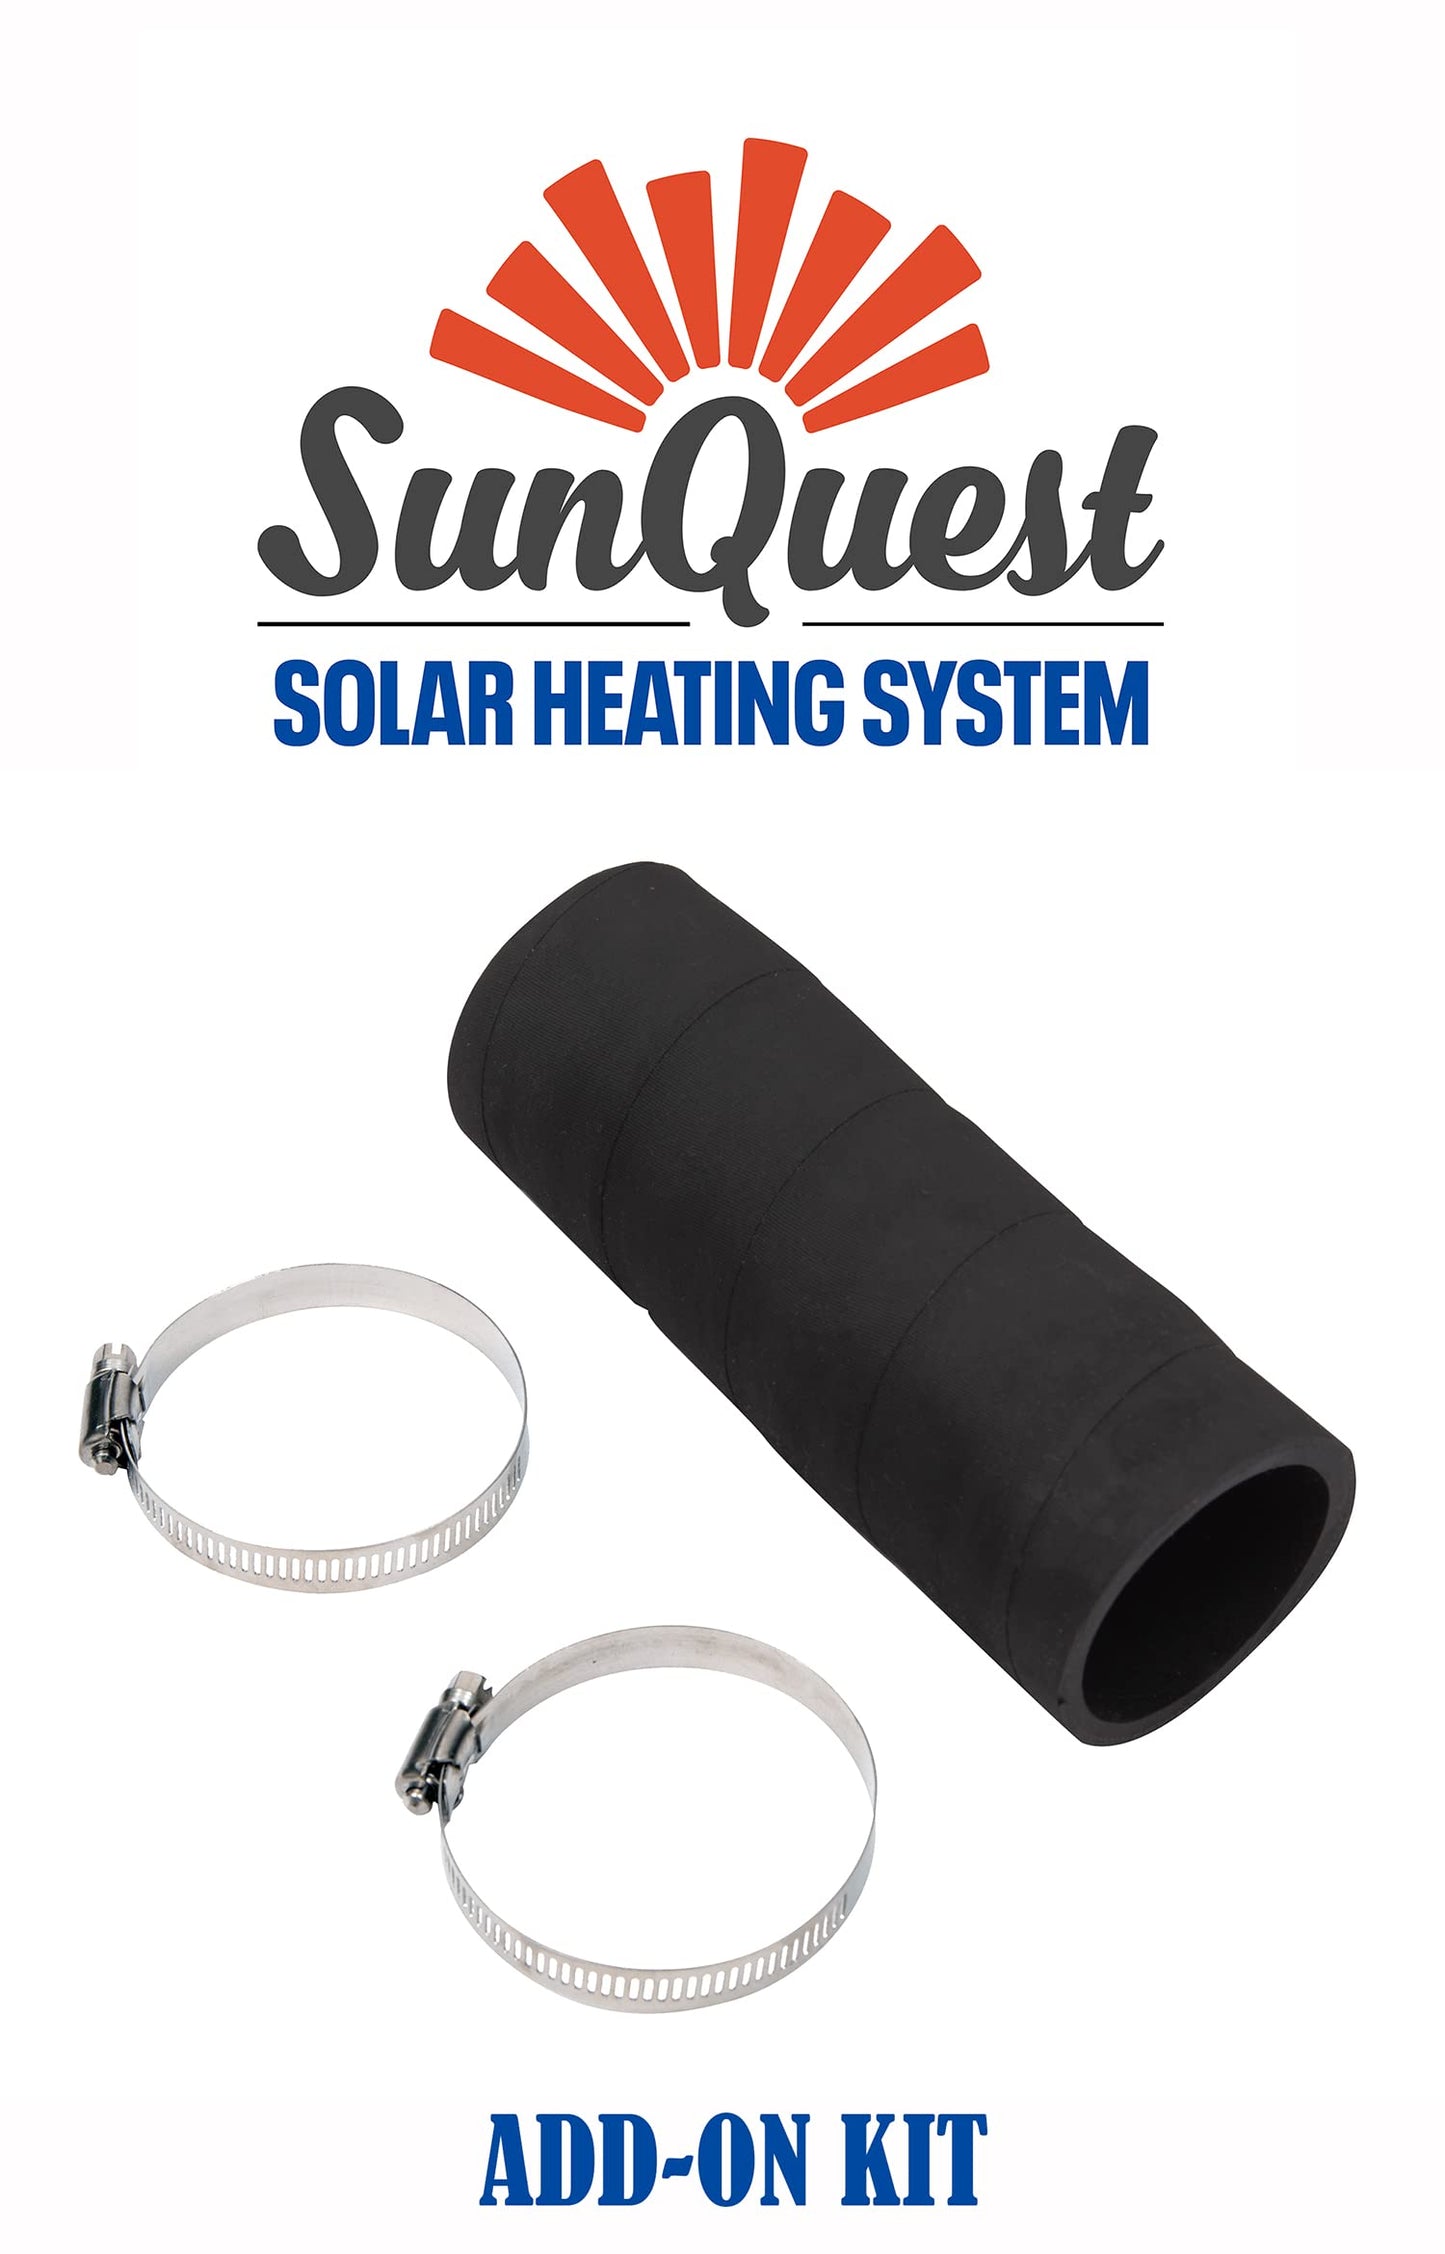 SunQuest Complete Pool Heater System - 3 (2ft x 20ft) Panels w/Bypass and Roof Kit - Solar Heater for Above Ground & Inground Swimming Pools - Tube on Web Design Panel-Polypropylene UV Resistant 3 - 2ft x 20ft Roof-Mounted